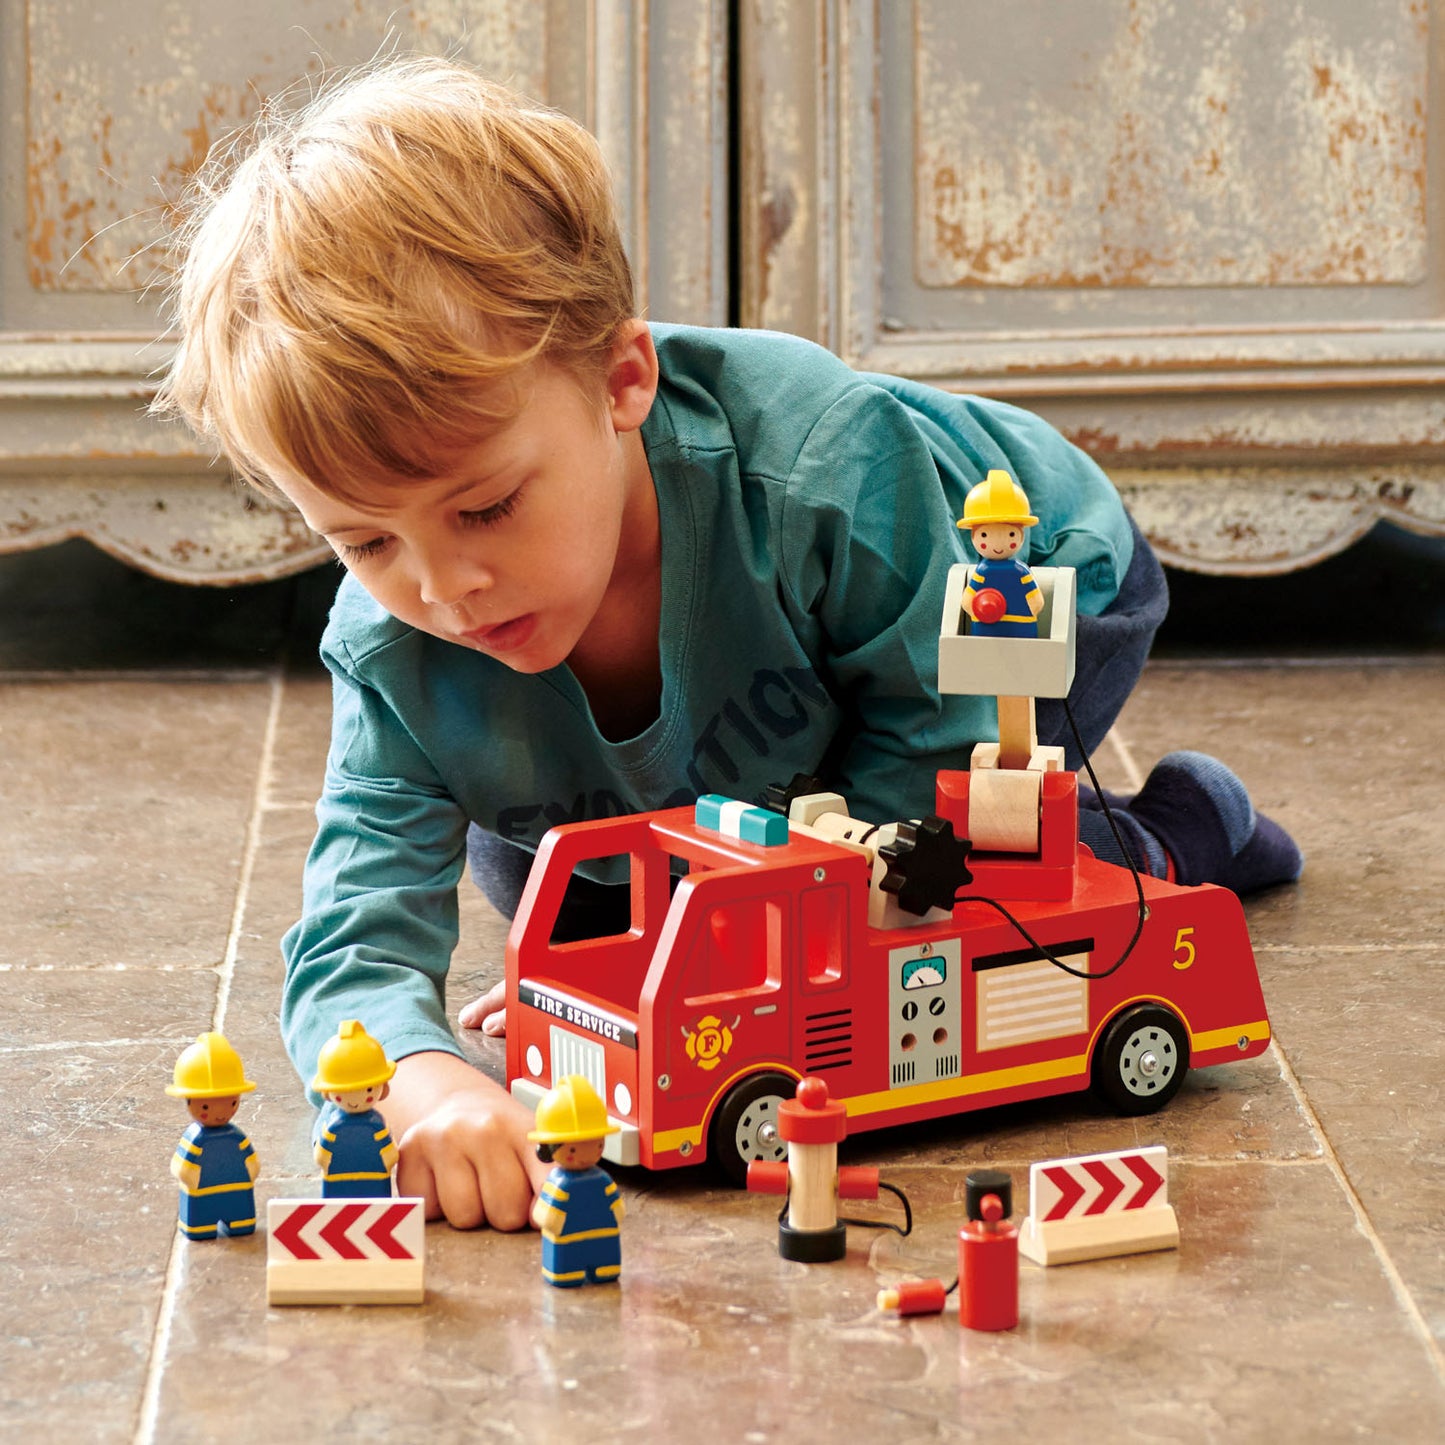 Boy having fun with wooden fire engine set